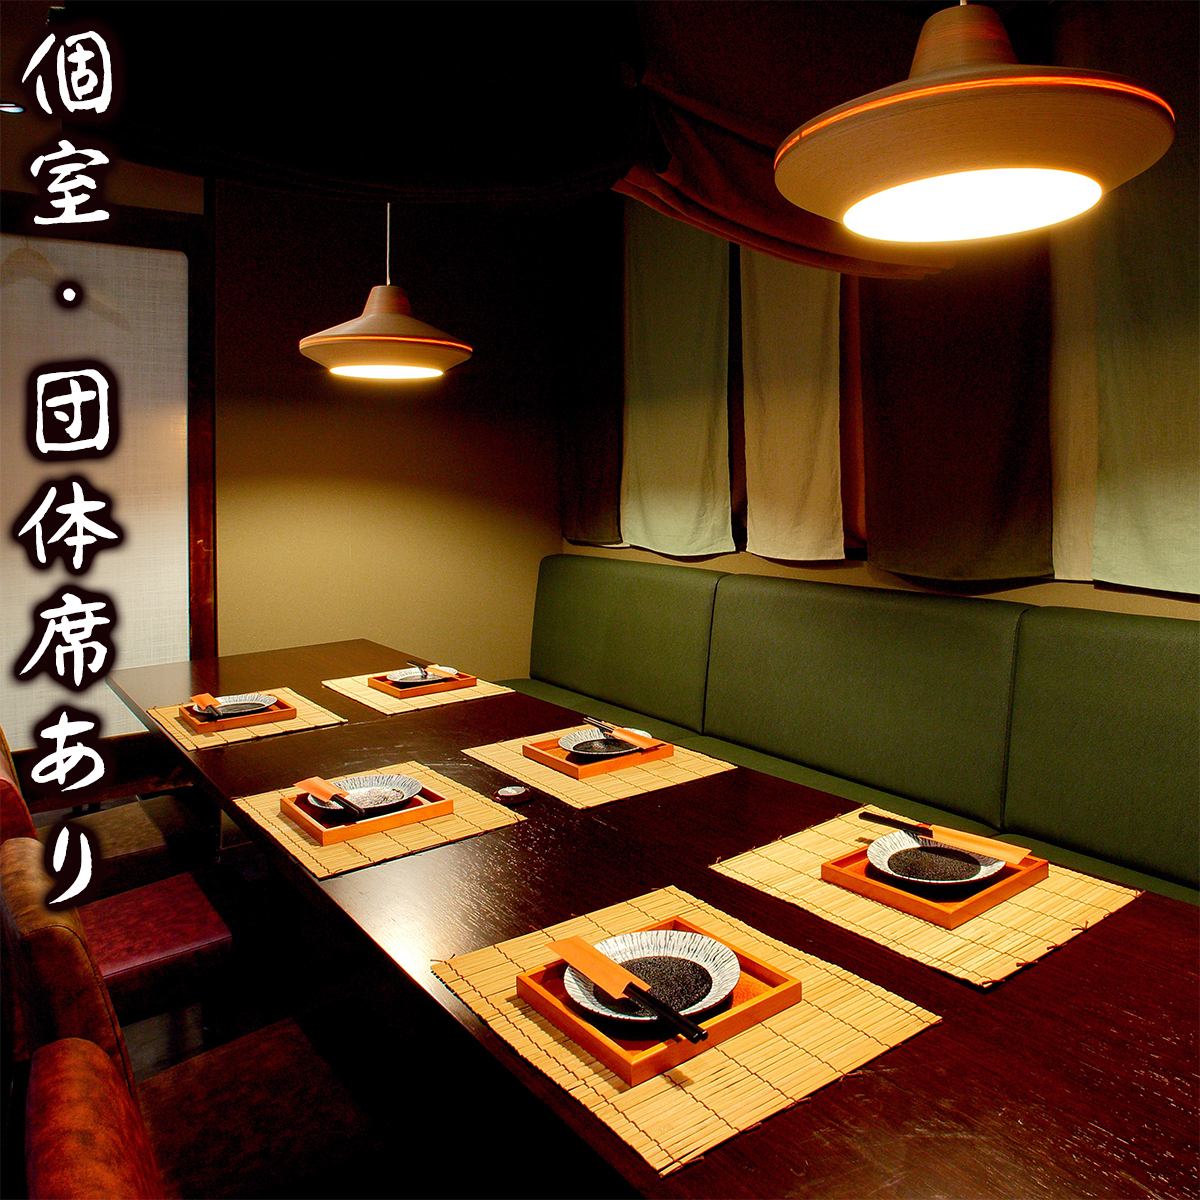 3 minutes from Sendai Station (Private rooms, group seating available) Full of delicious dishes including Miyagi specialties!